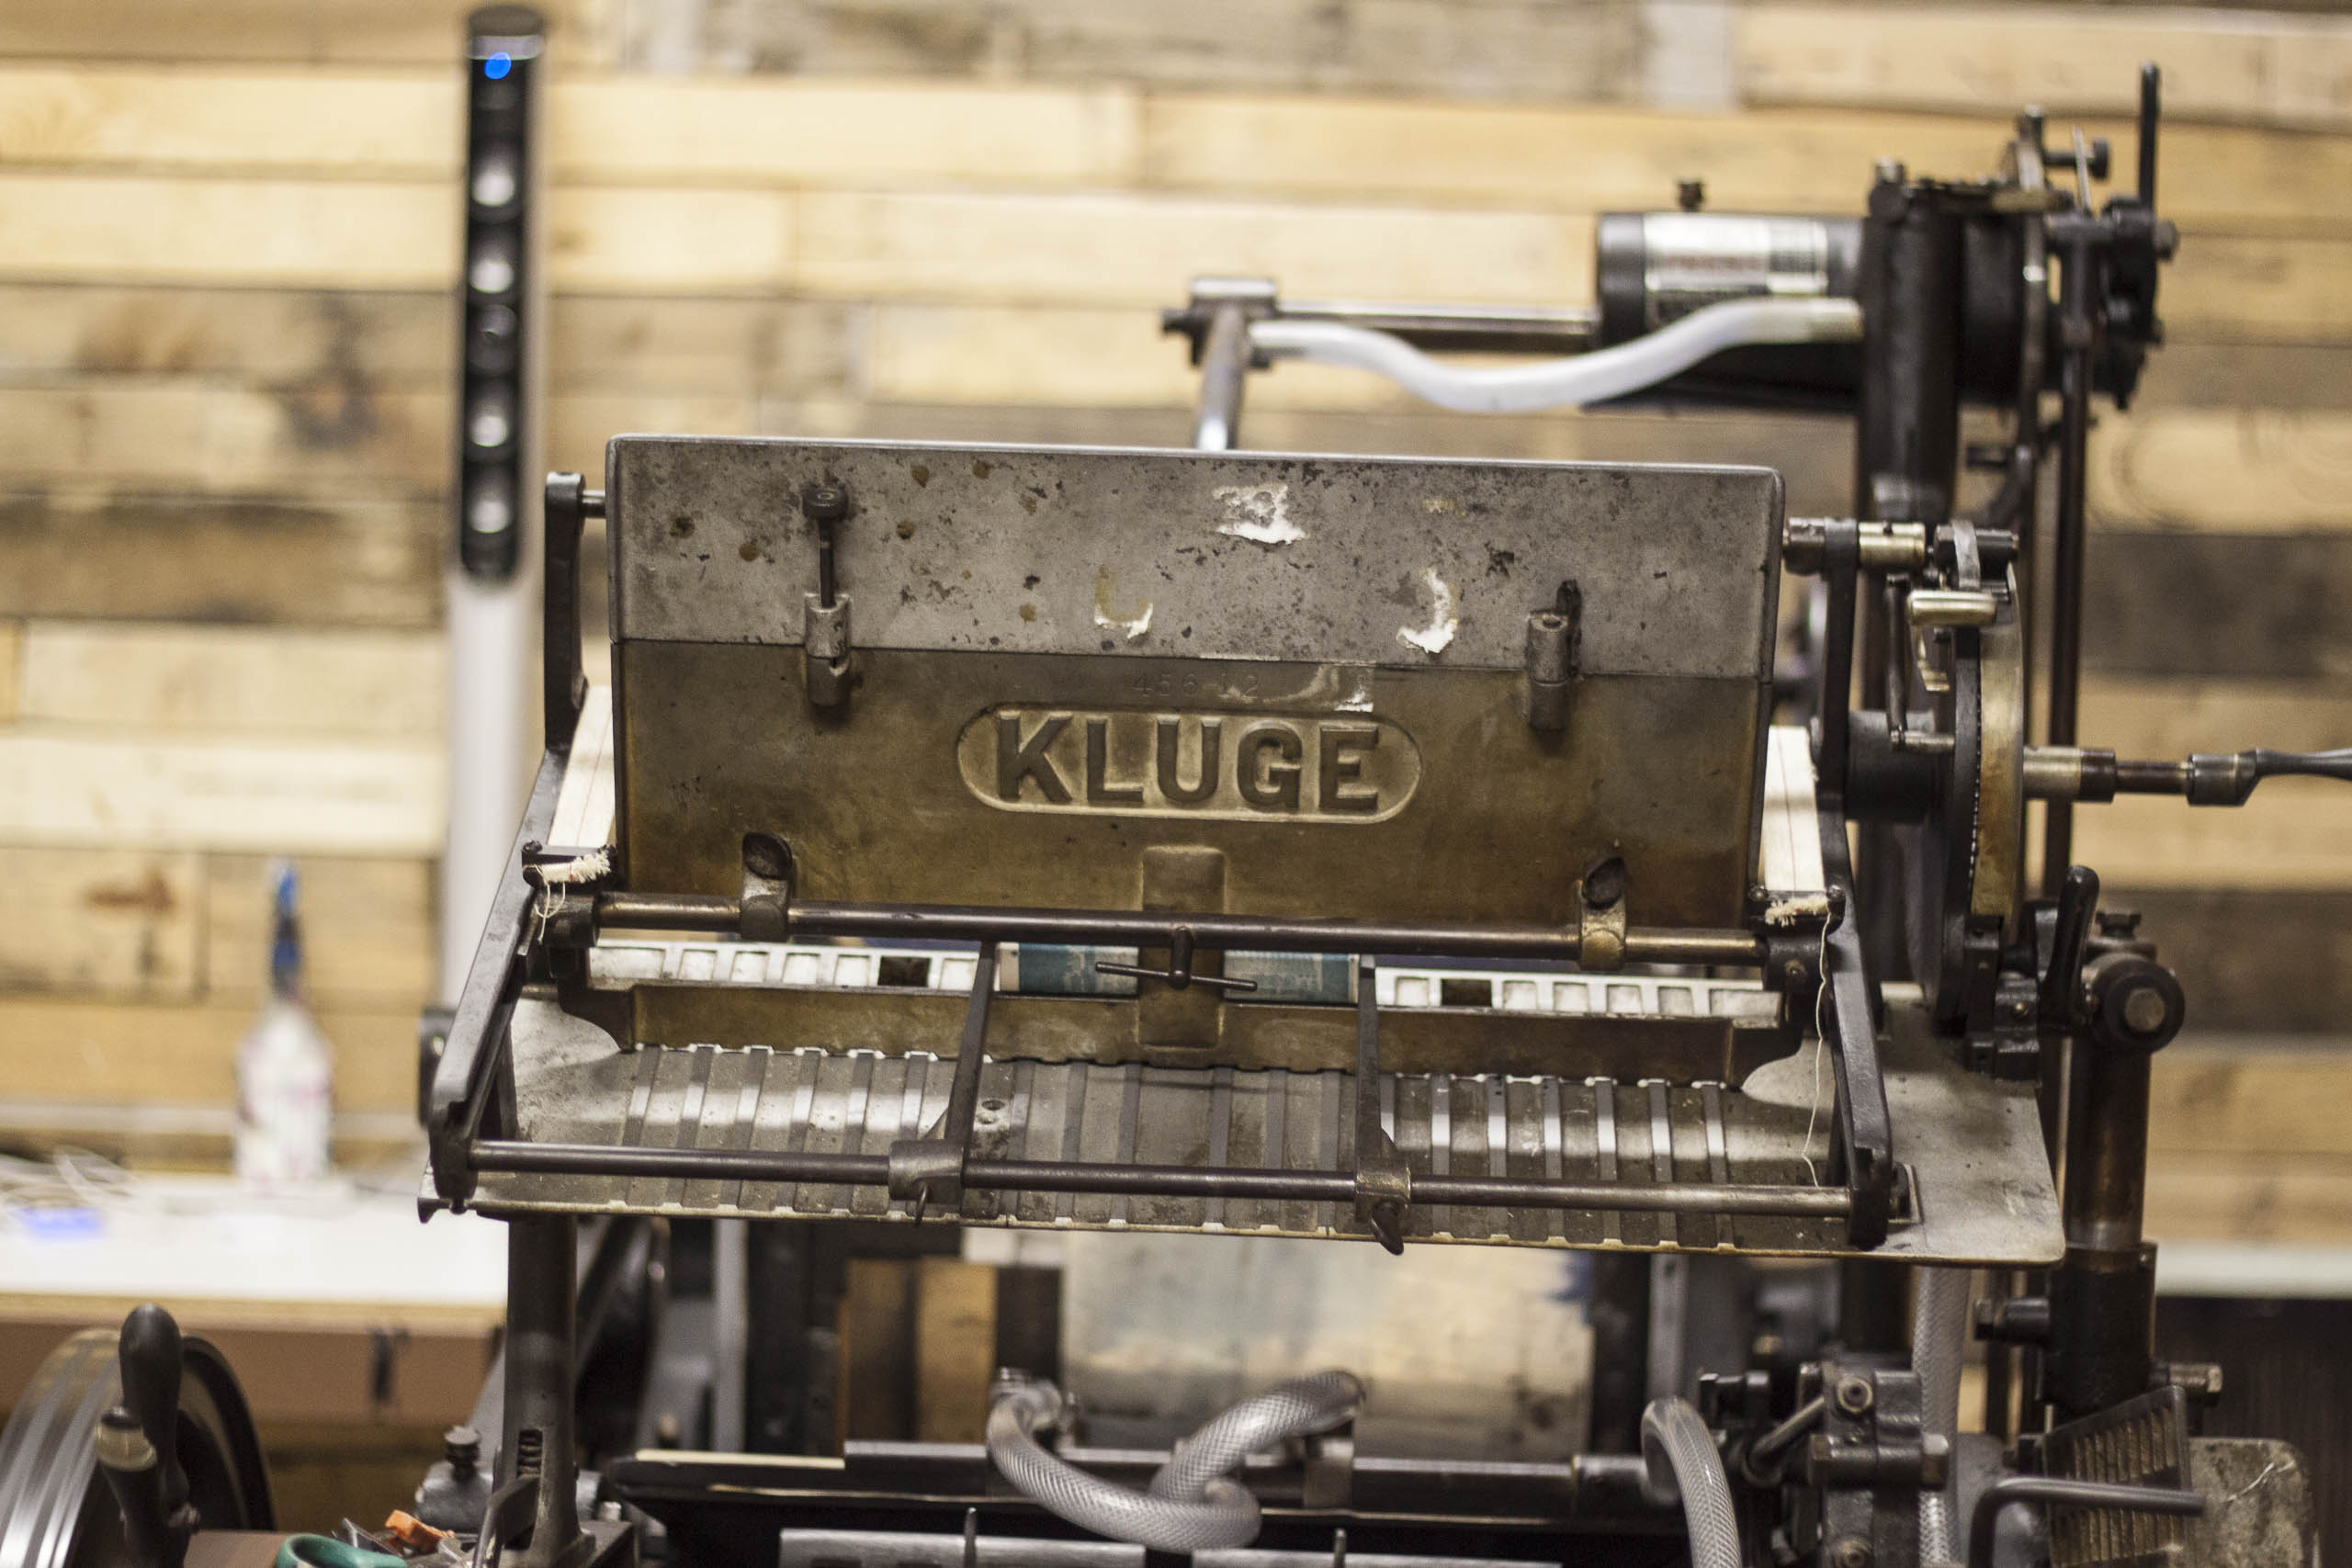 How (not) to Start a Relationship With Your Letterpress Printer